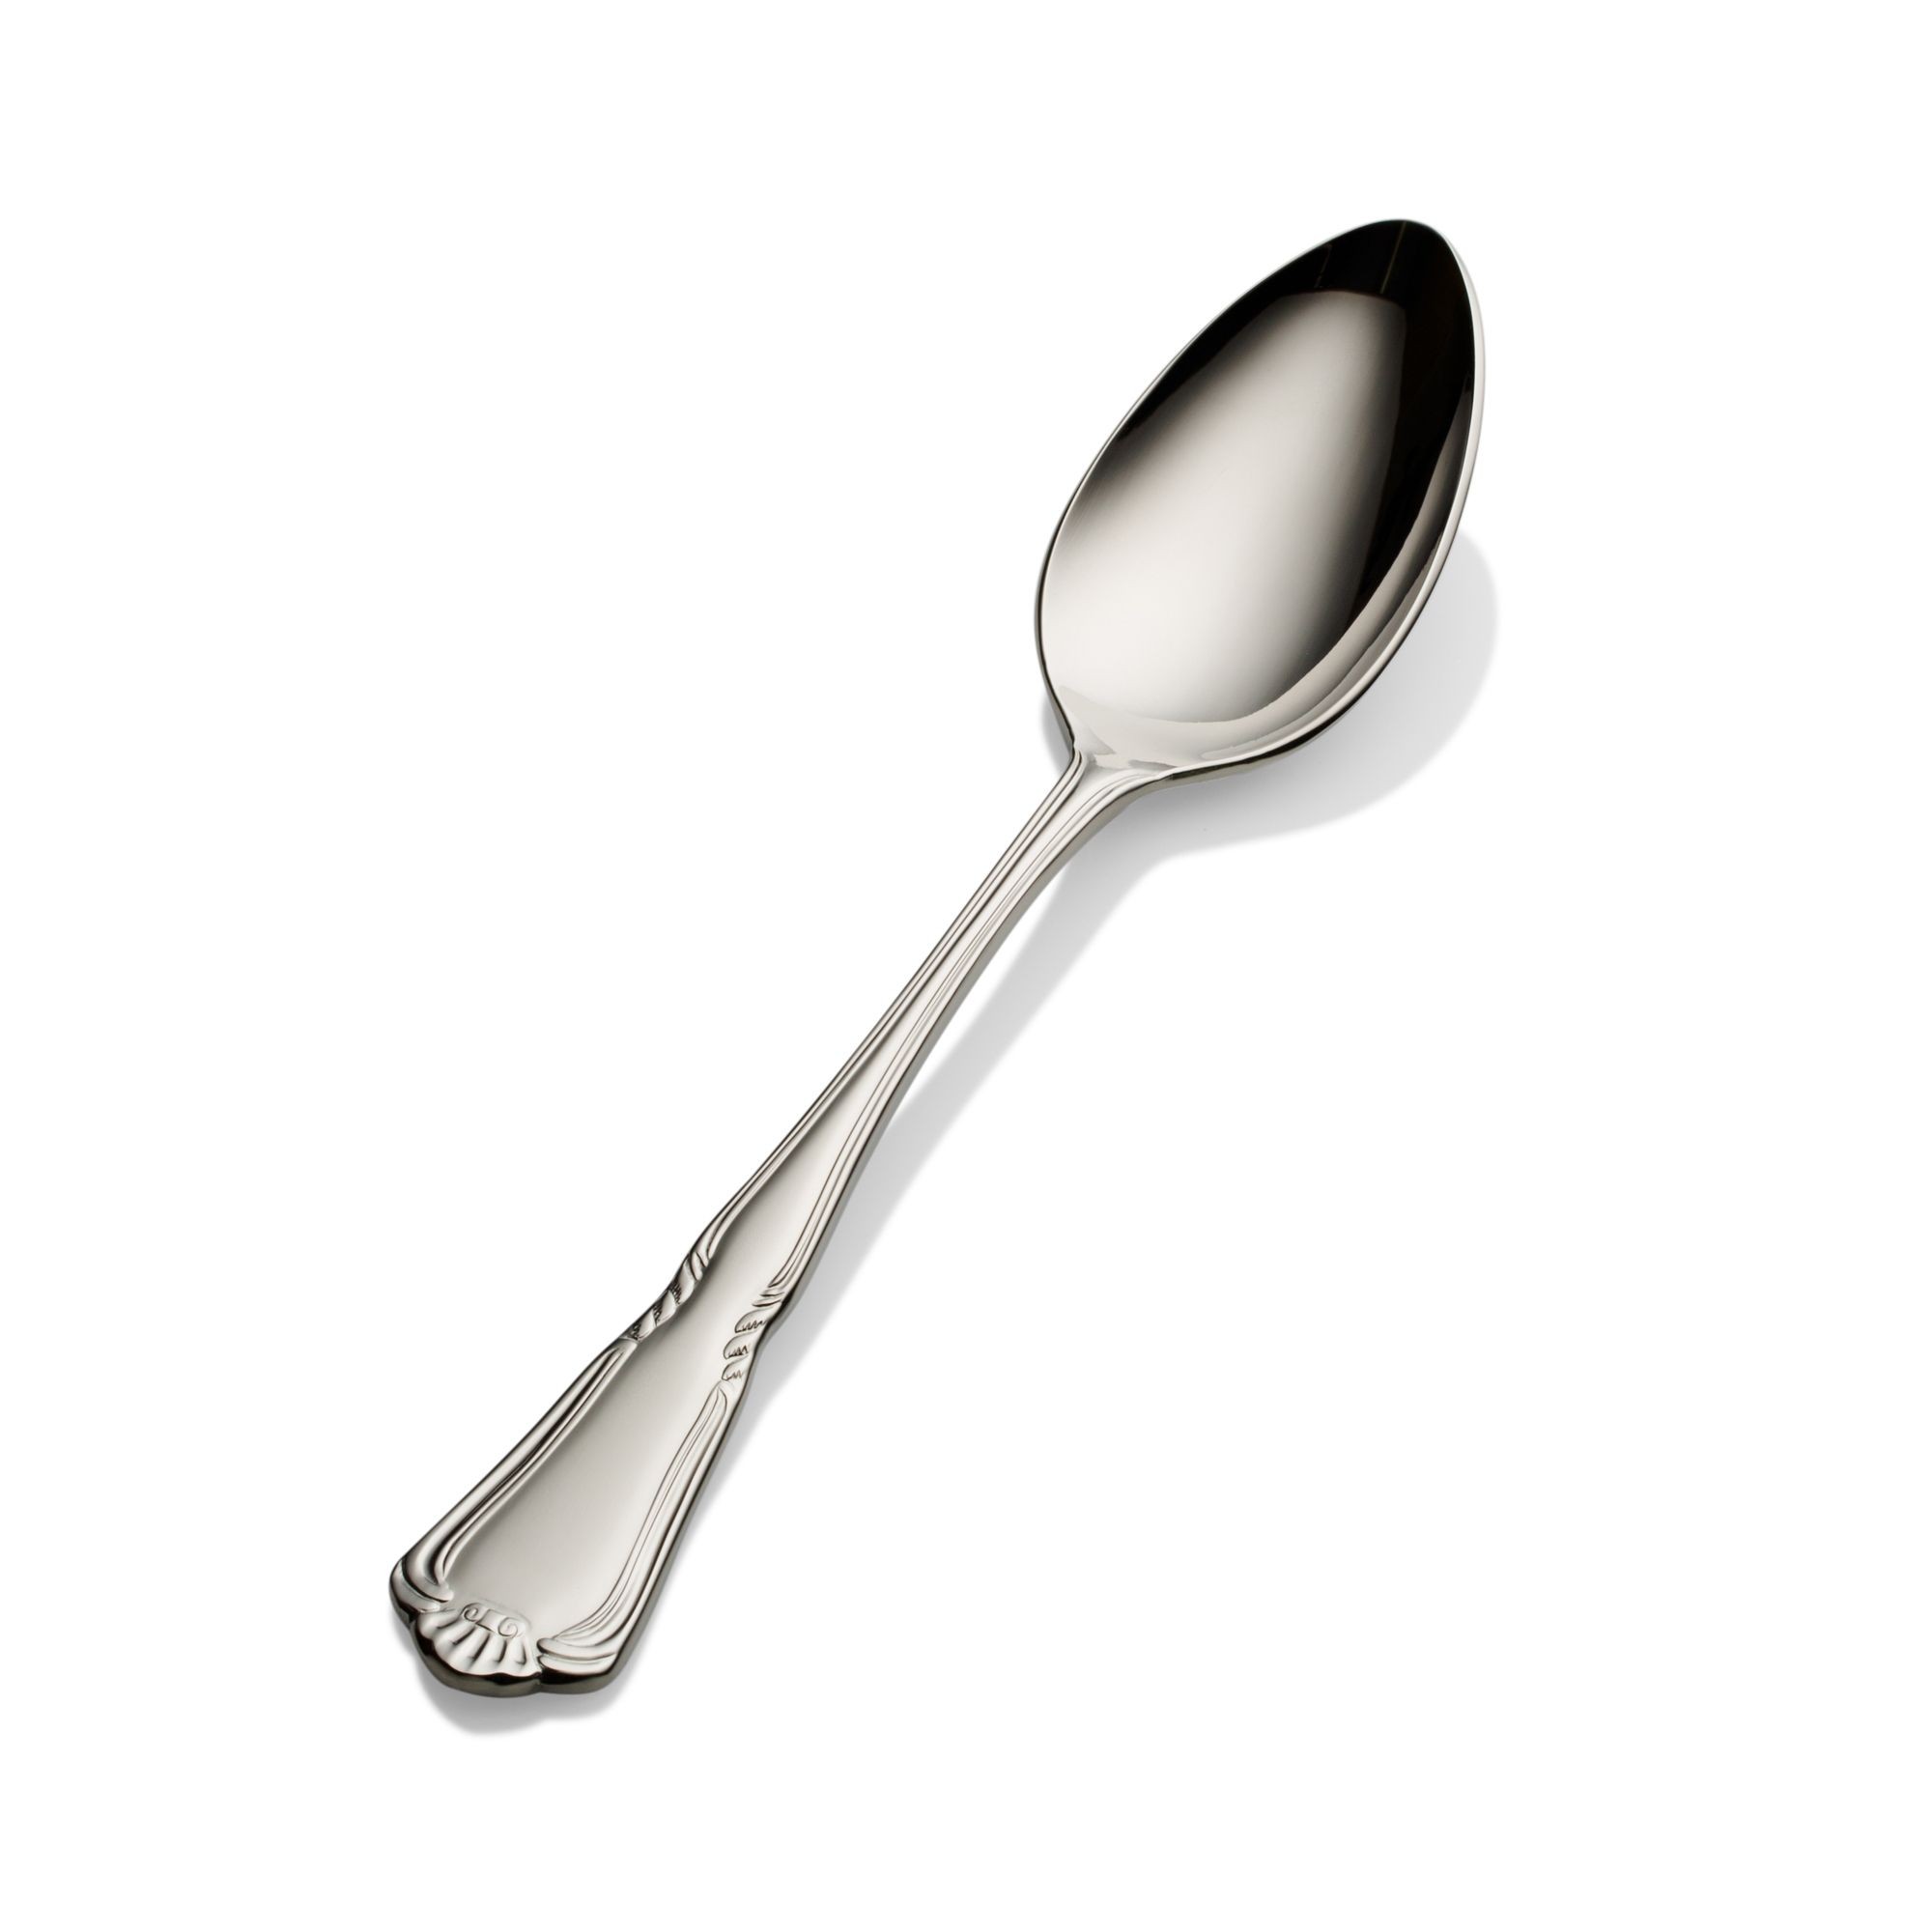 Bon Chef S1503 Sorento 18/8 Stainless Steel Soup and Dessert Spoon